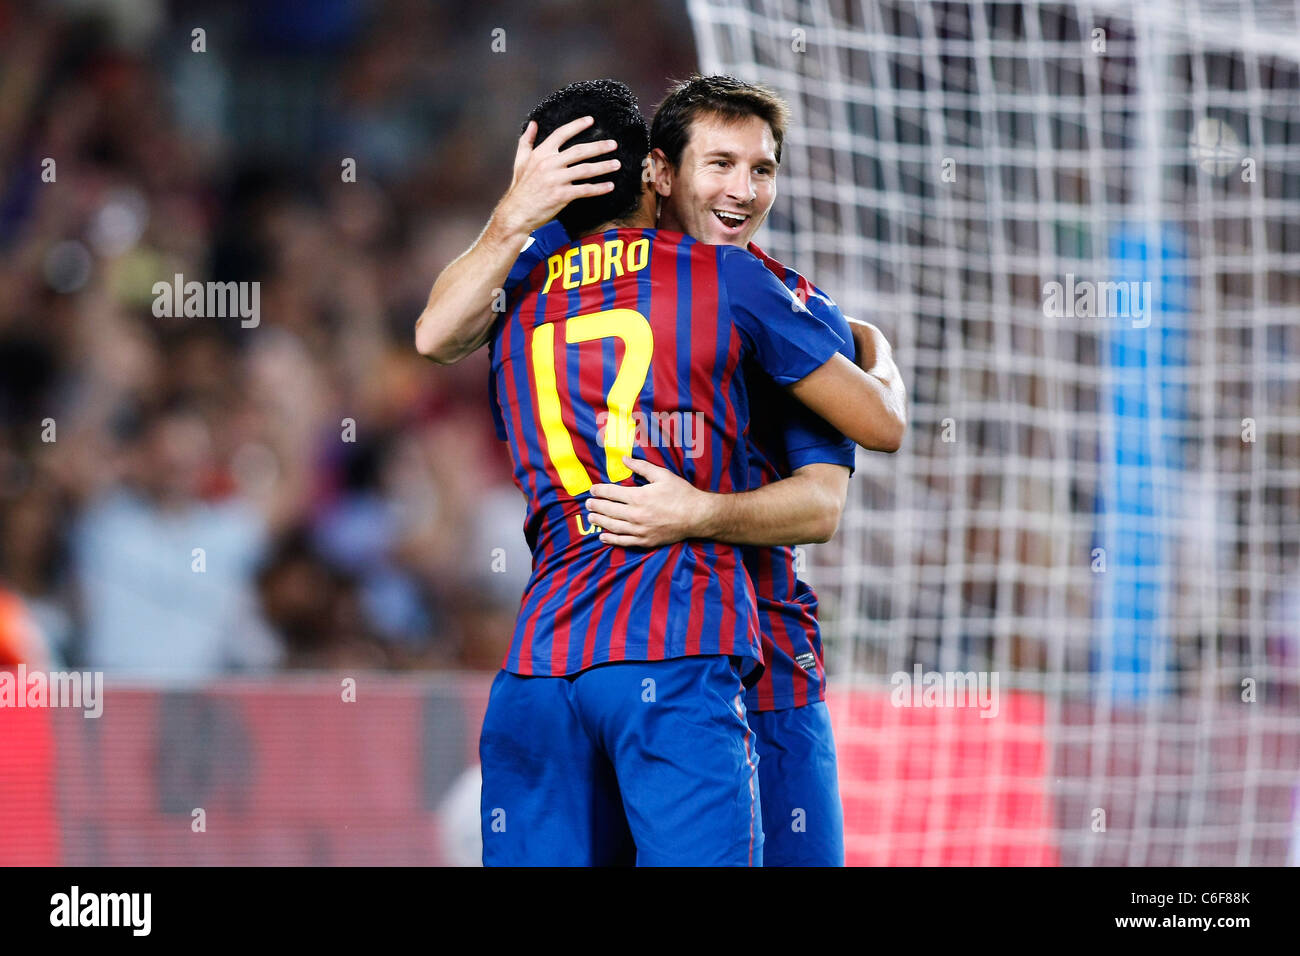 Pedro Rodriguez and Lionel Messi (Barcelona) celebrating their point for Trofeo Joan Gamper match between FC Barcelona 5-0 Napol Stock Photo